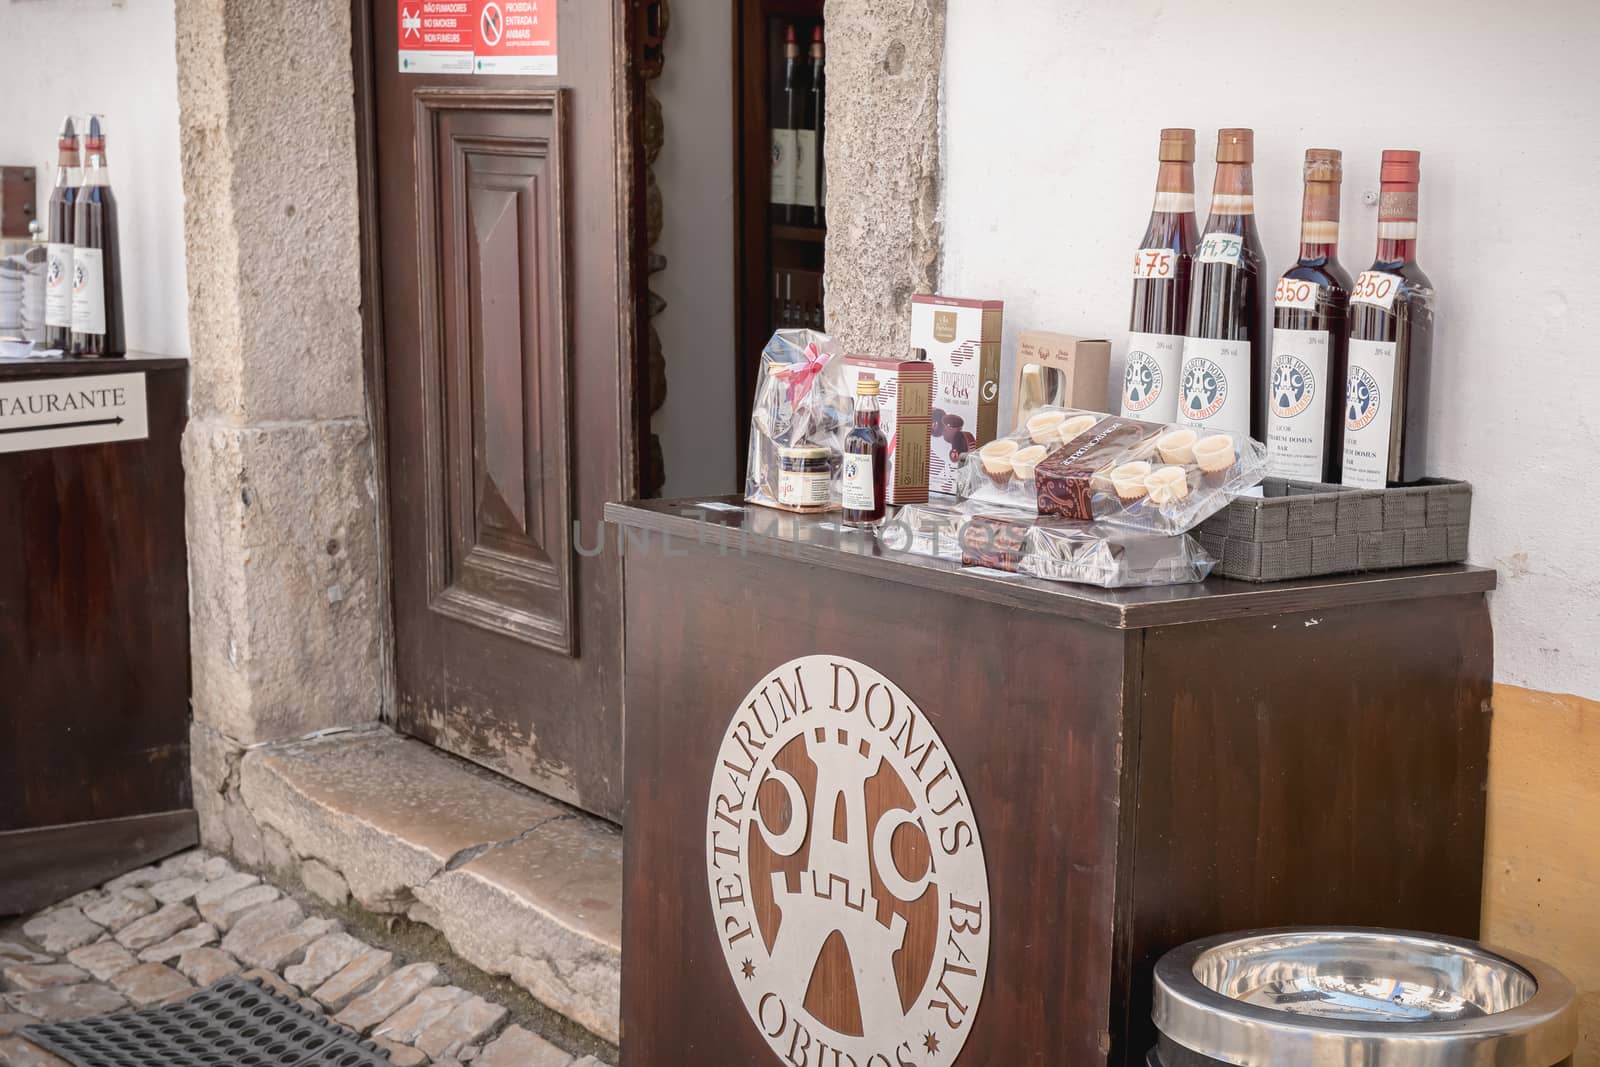 Display of a shop of ginjinha in obidos, Portugal by AtlanticEUROSTOXX